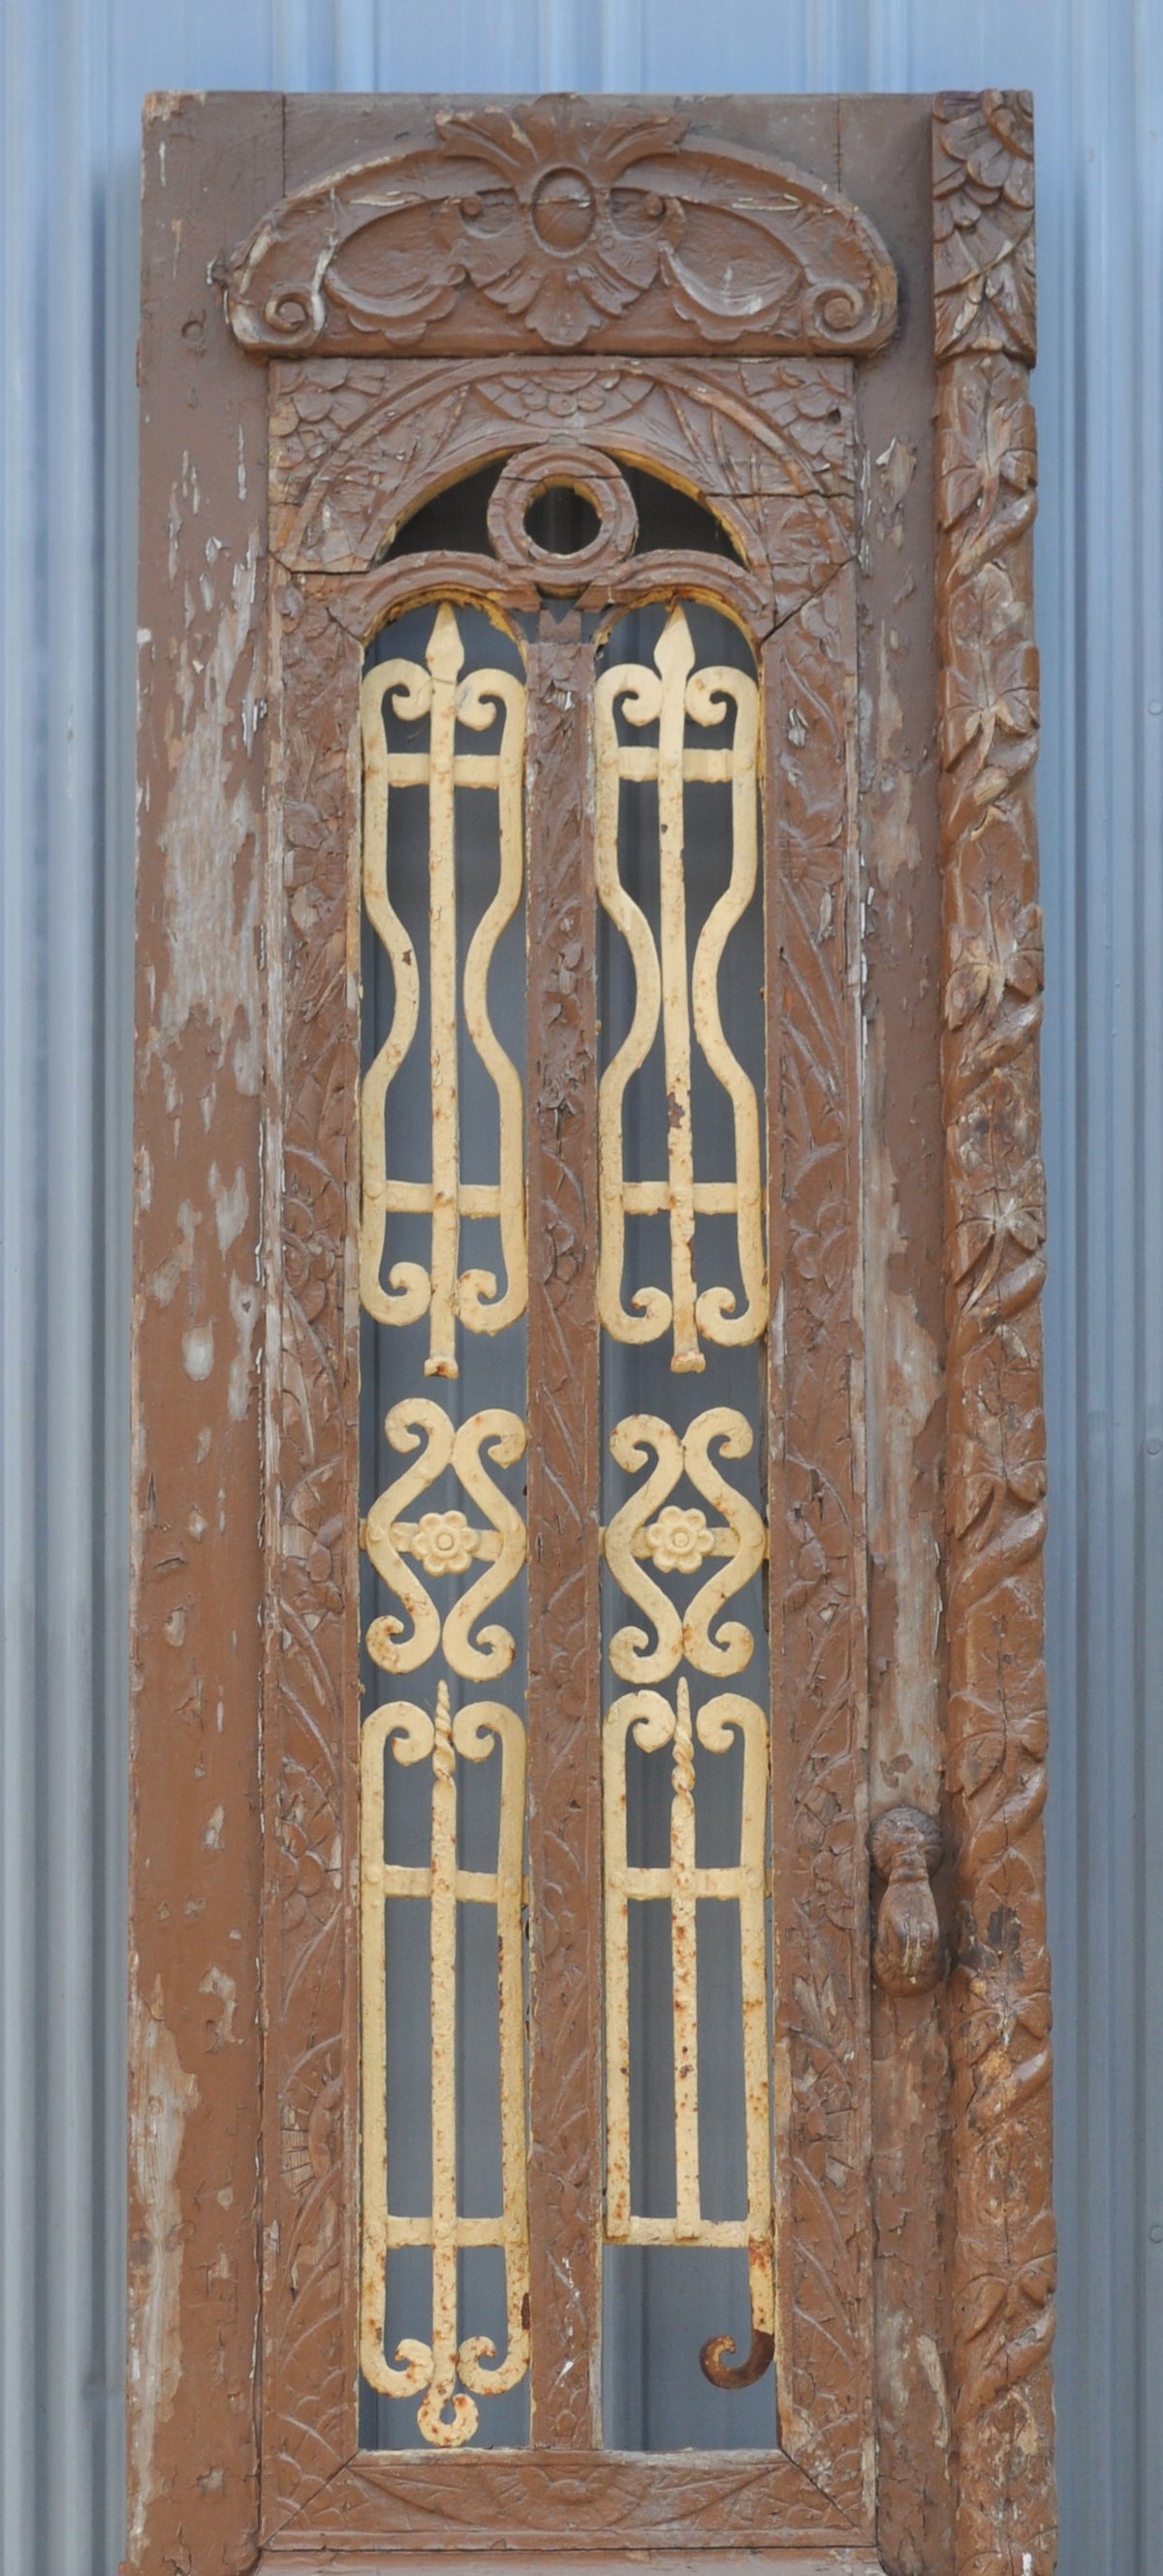 Monumental Pair of Antique Egyptian Paneled and Iron Doors, Circa 1880